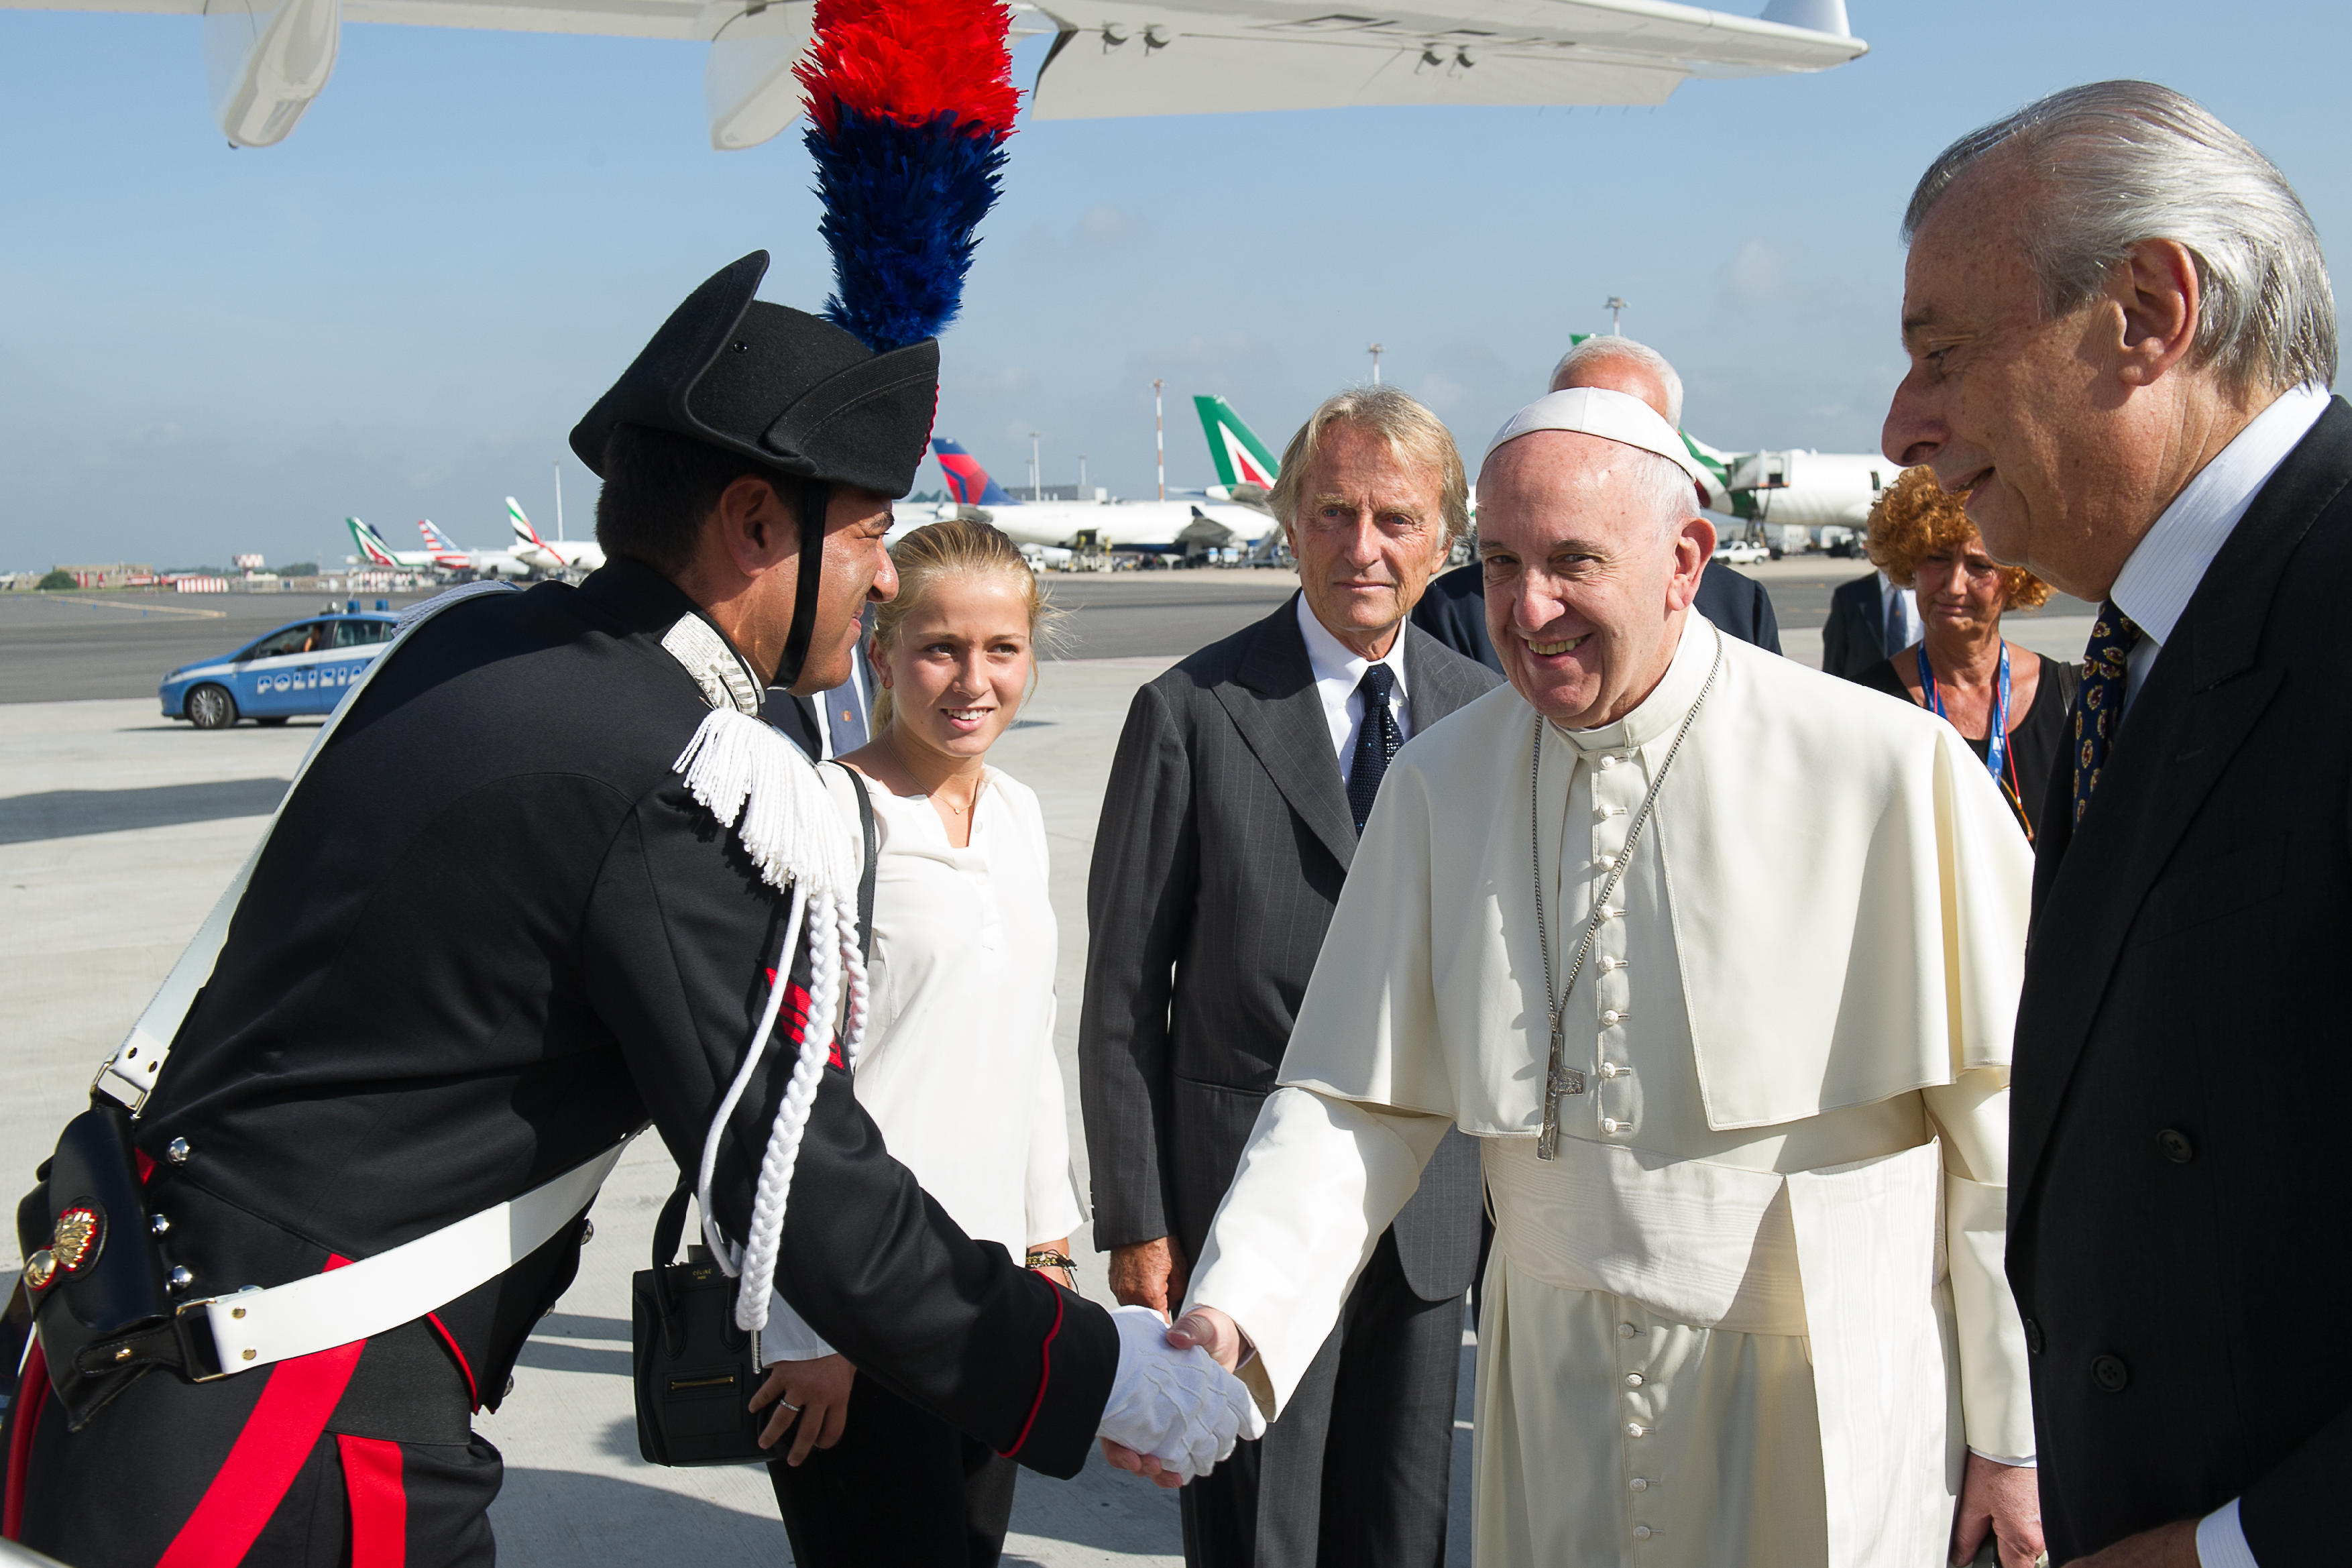 Departure ceremony at Fiumicino's International Airport